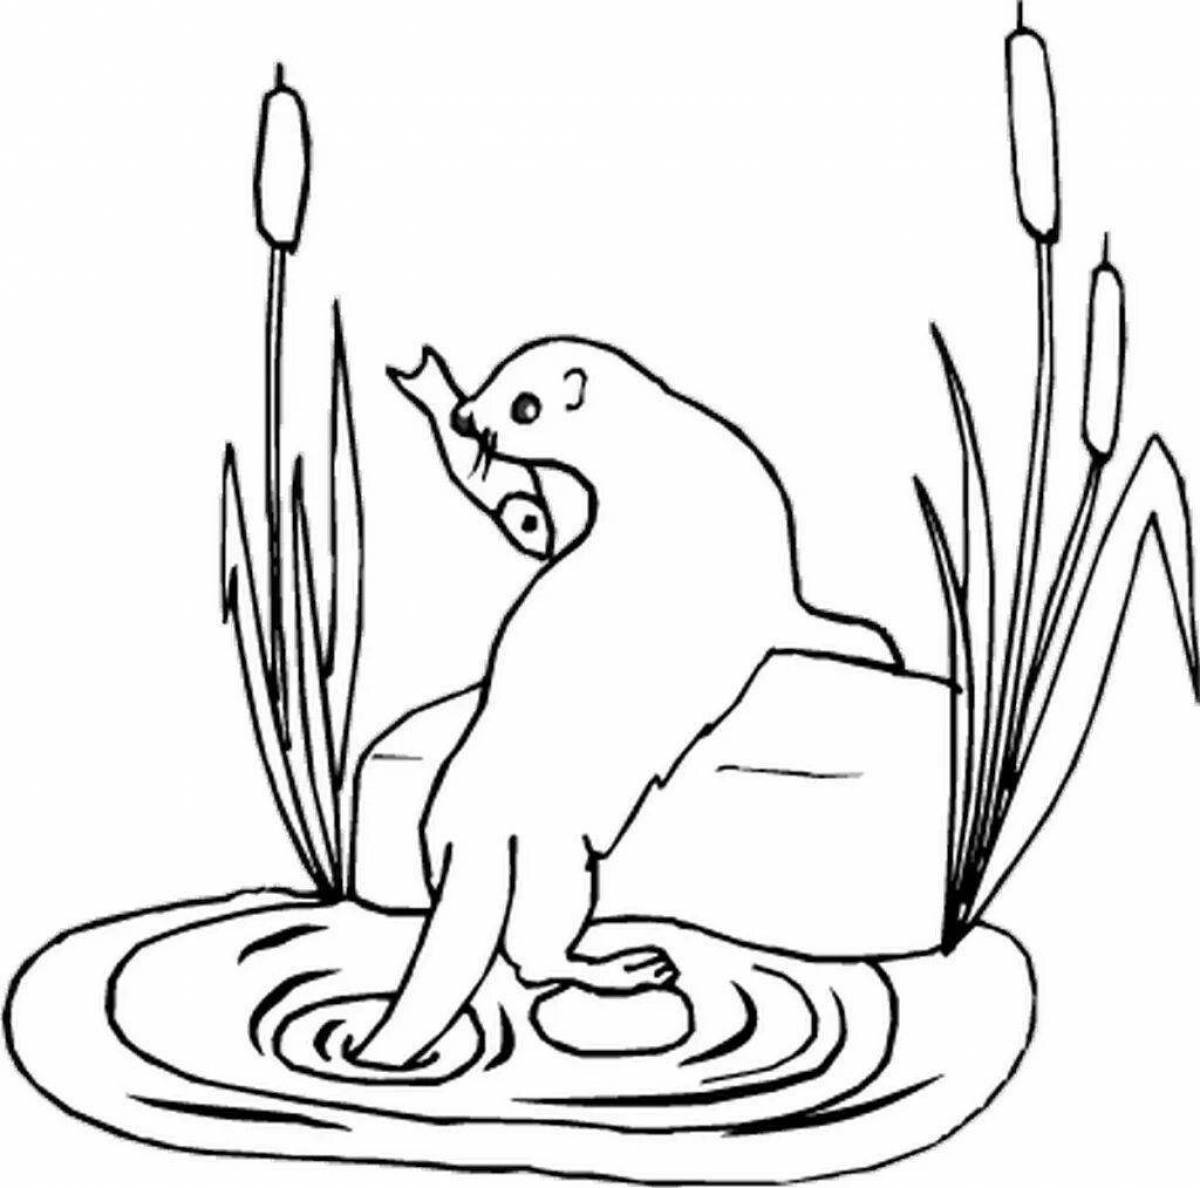 Adorable river otter coloring page